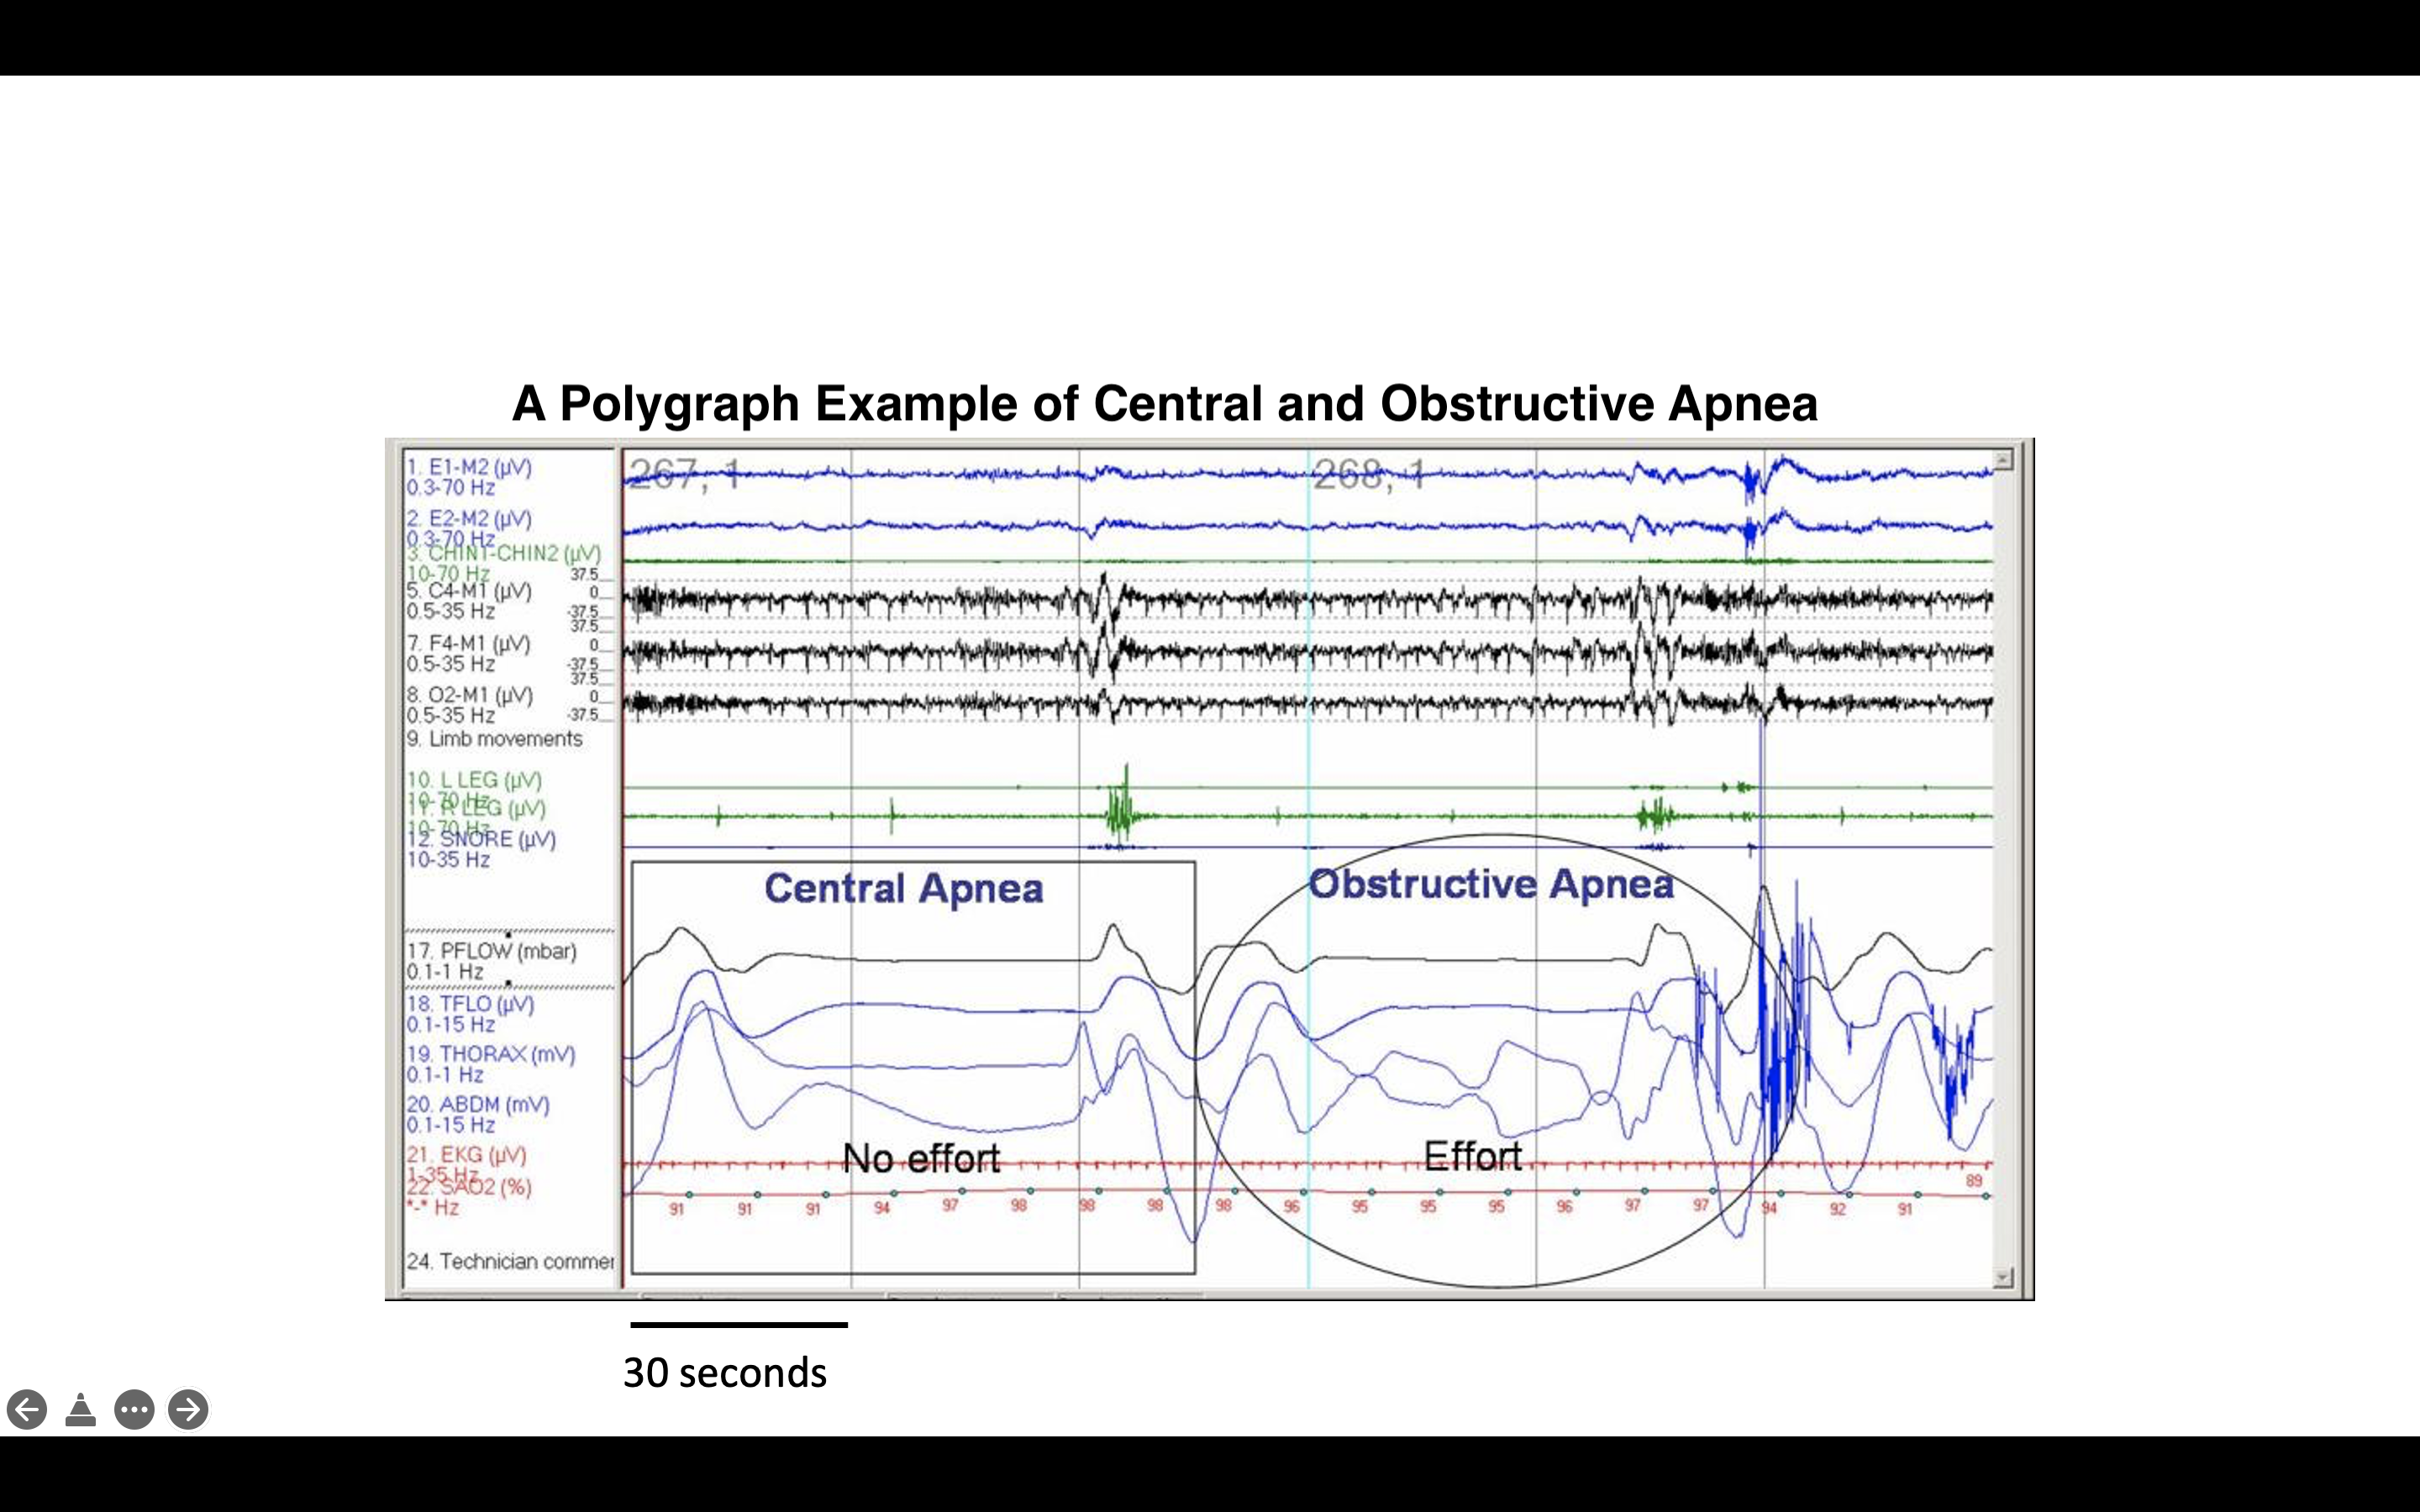 <p>Central and Obstructive Apnea, Polygraph. The image depicts an example of central and obstructive apnea.</p>